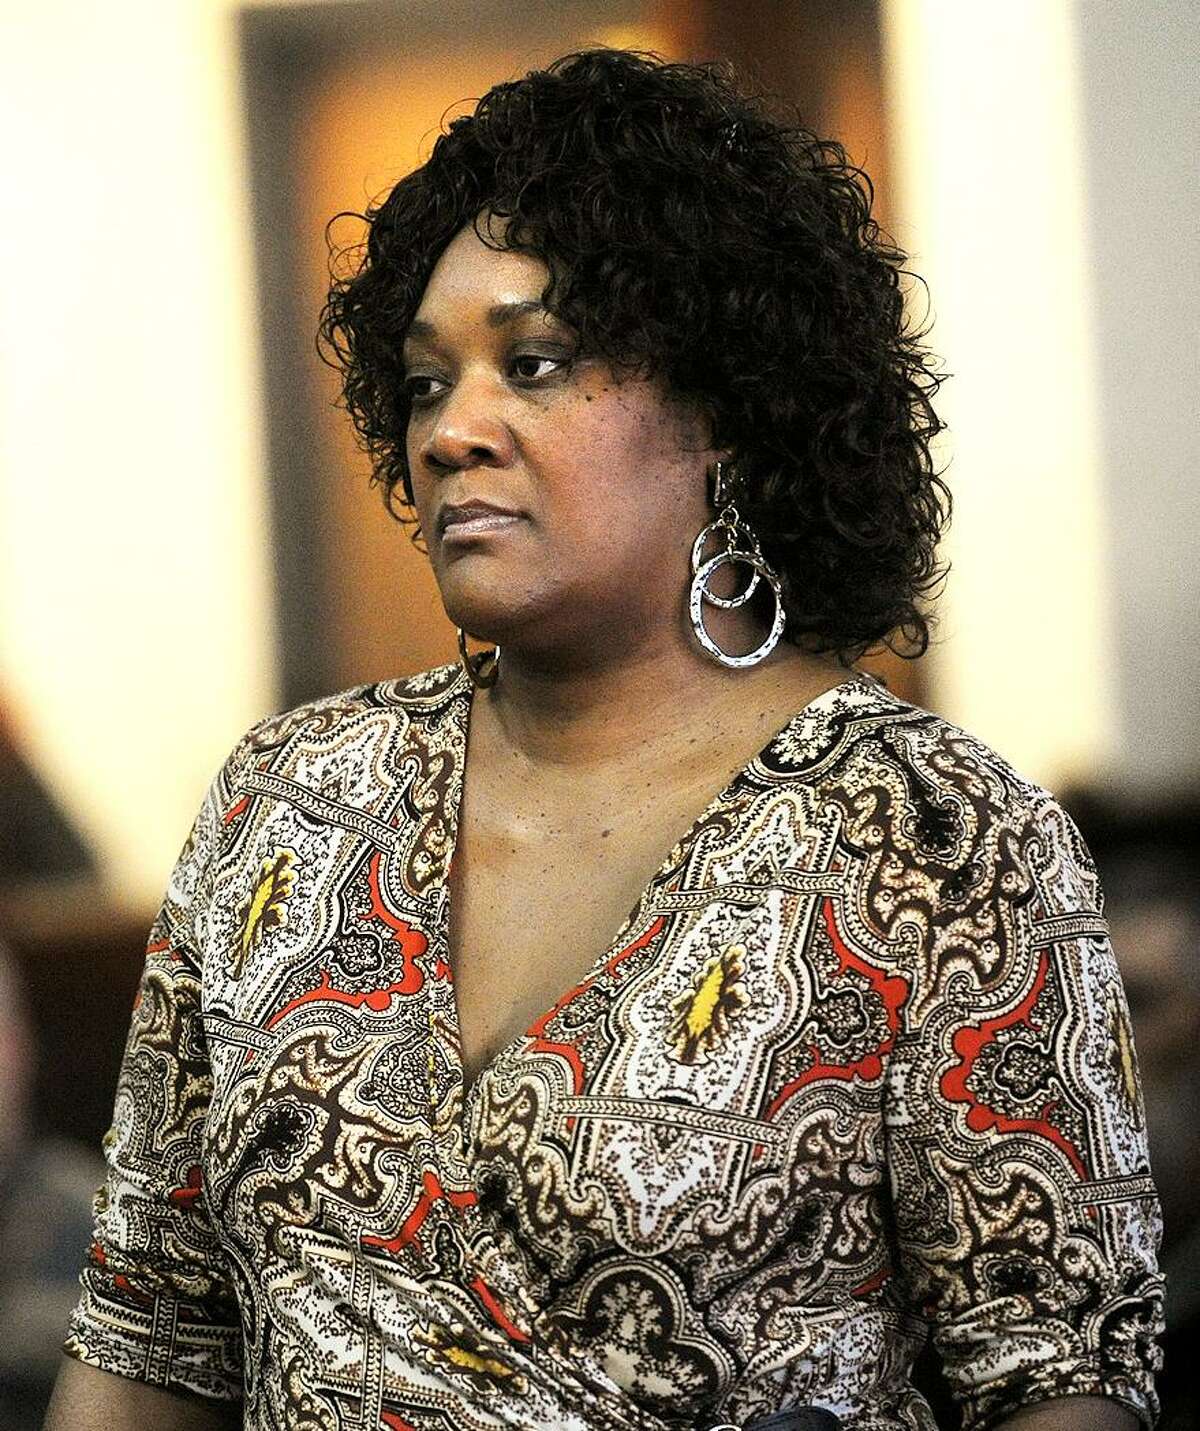 Patricia Daniels at Superior Court in Bridgeport, Conn. on, January 22, 2015.